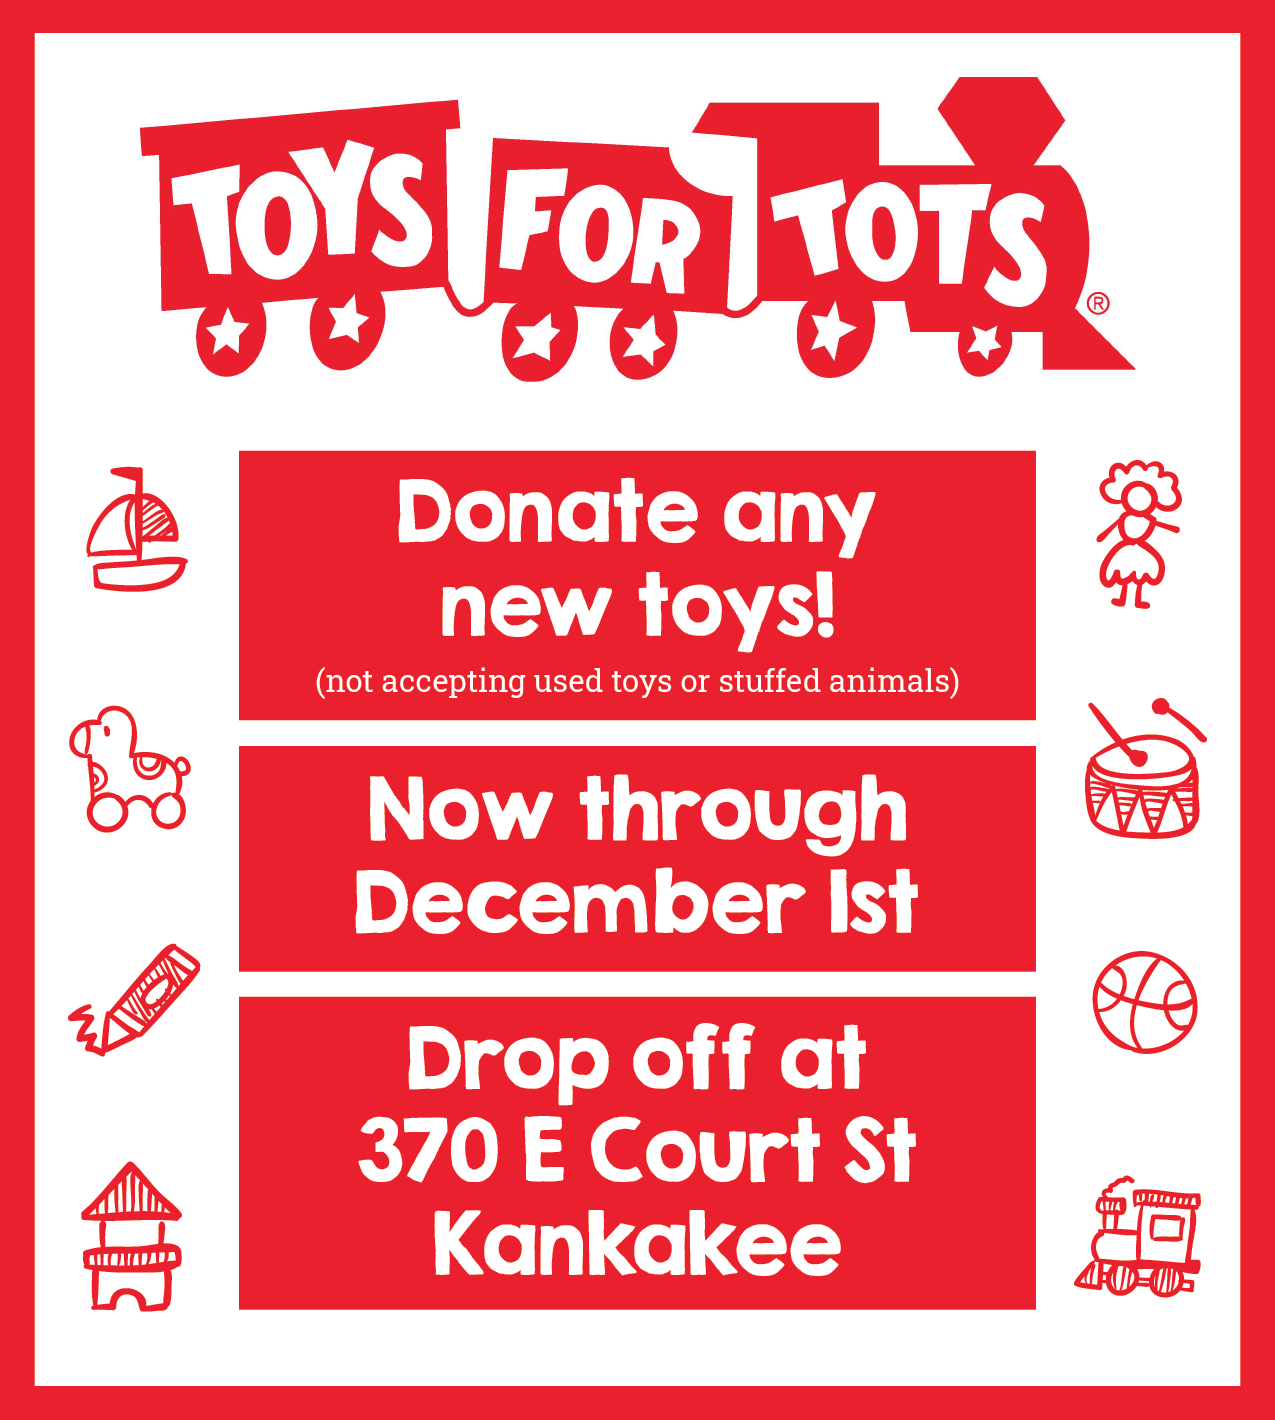 How To A Toys For Tots Drop Off Location Home Alqu